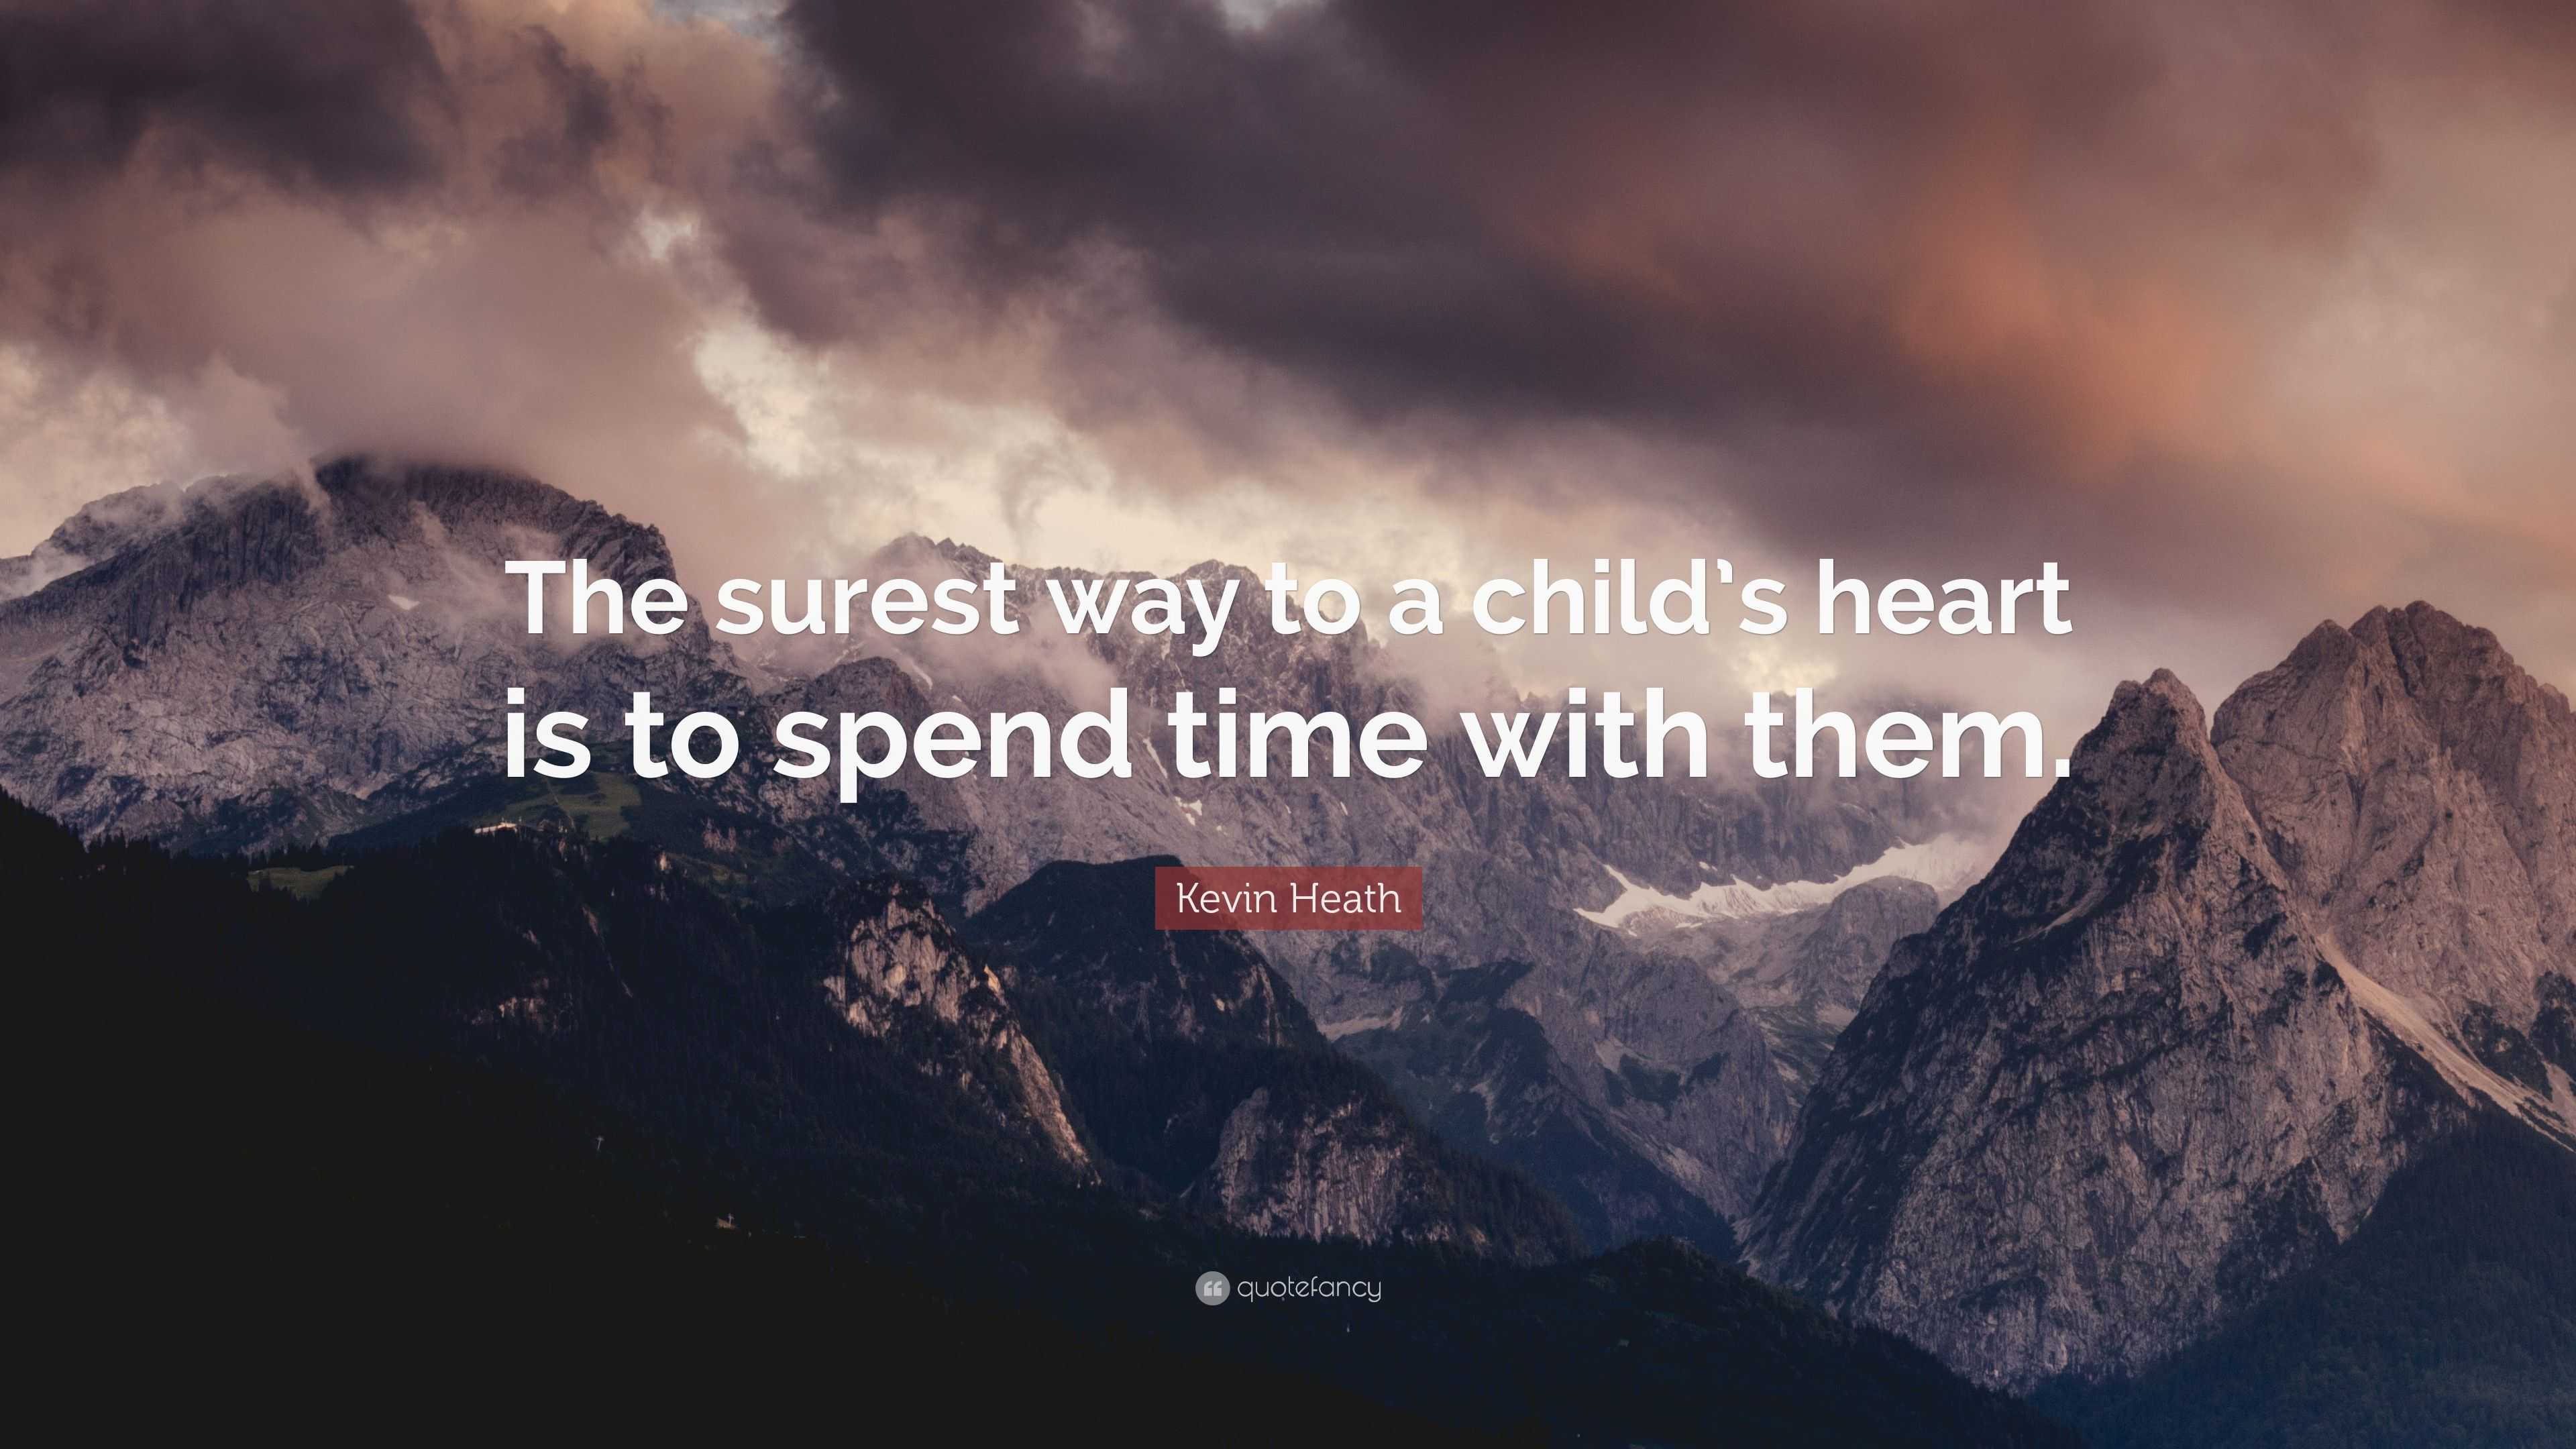 https://quotefancy.com/media/wallpaper/3840x2160/2786526-Kevin-Heath-Quote-The-surest-way-to-a-child-s-heart-is-to-spend.jpg